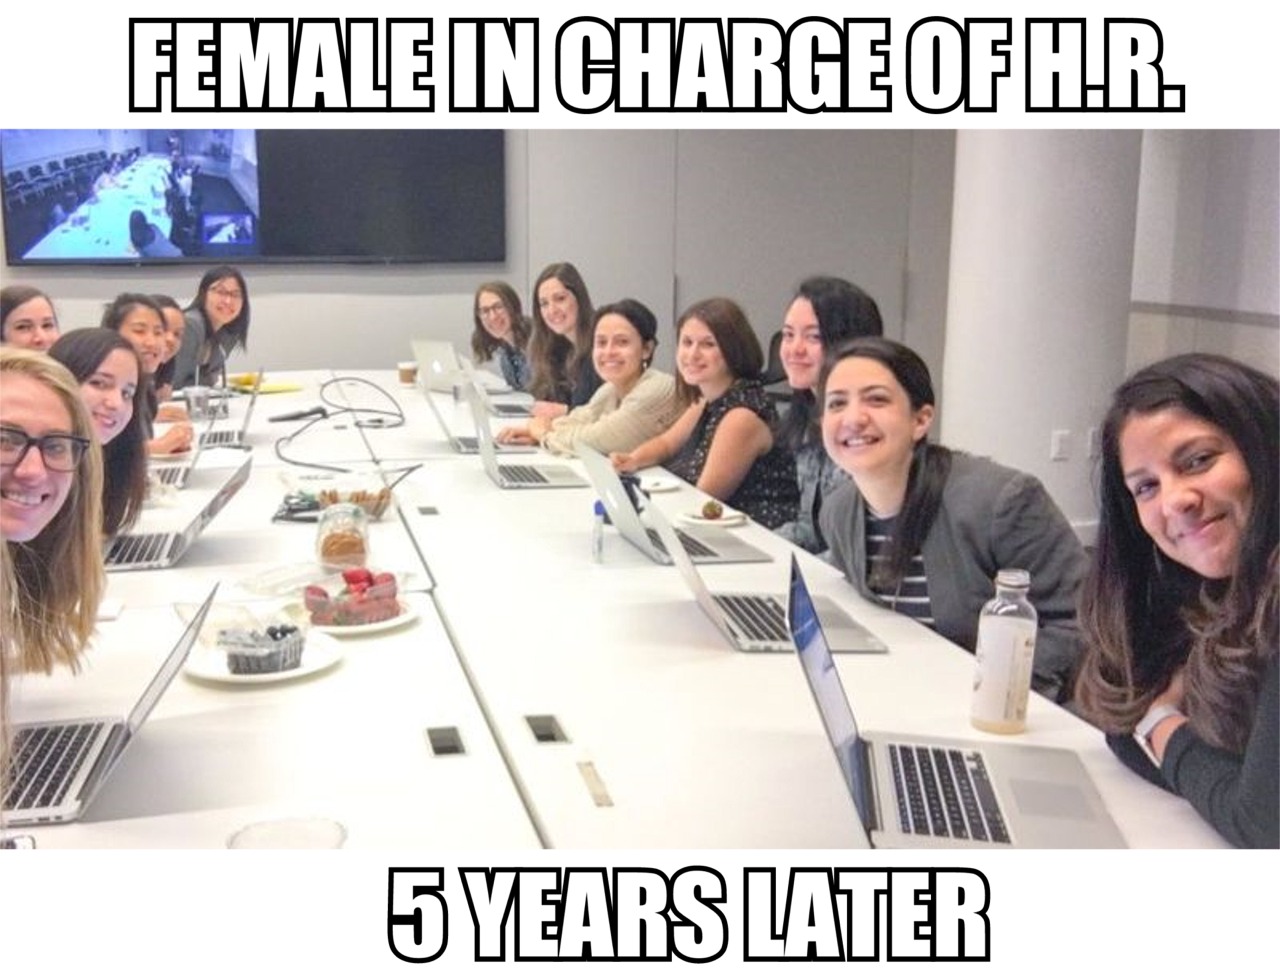 memes - huffington post editorial board - Female In Charge Of H.R. 5 Years Later